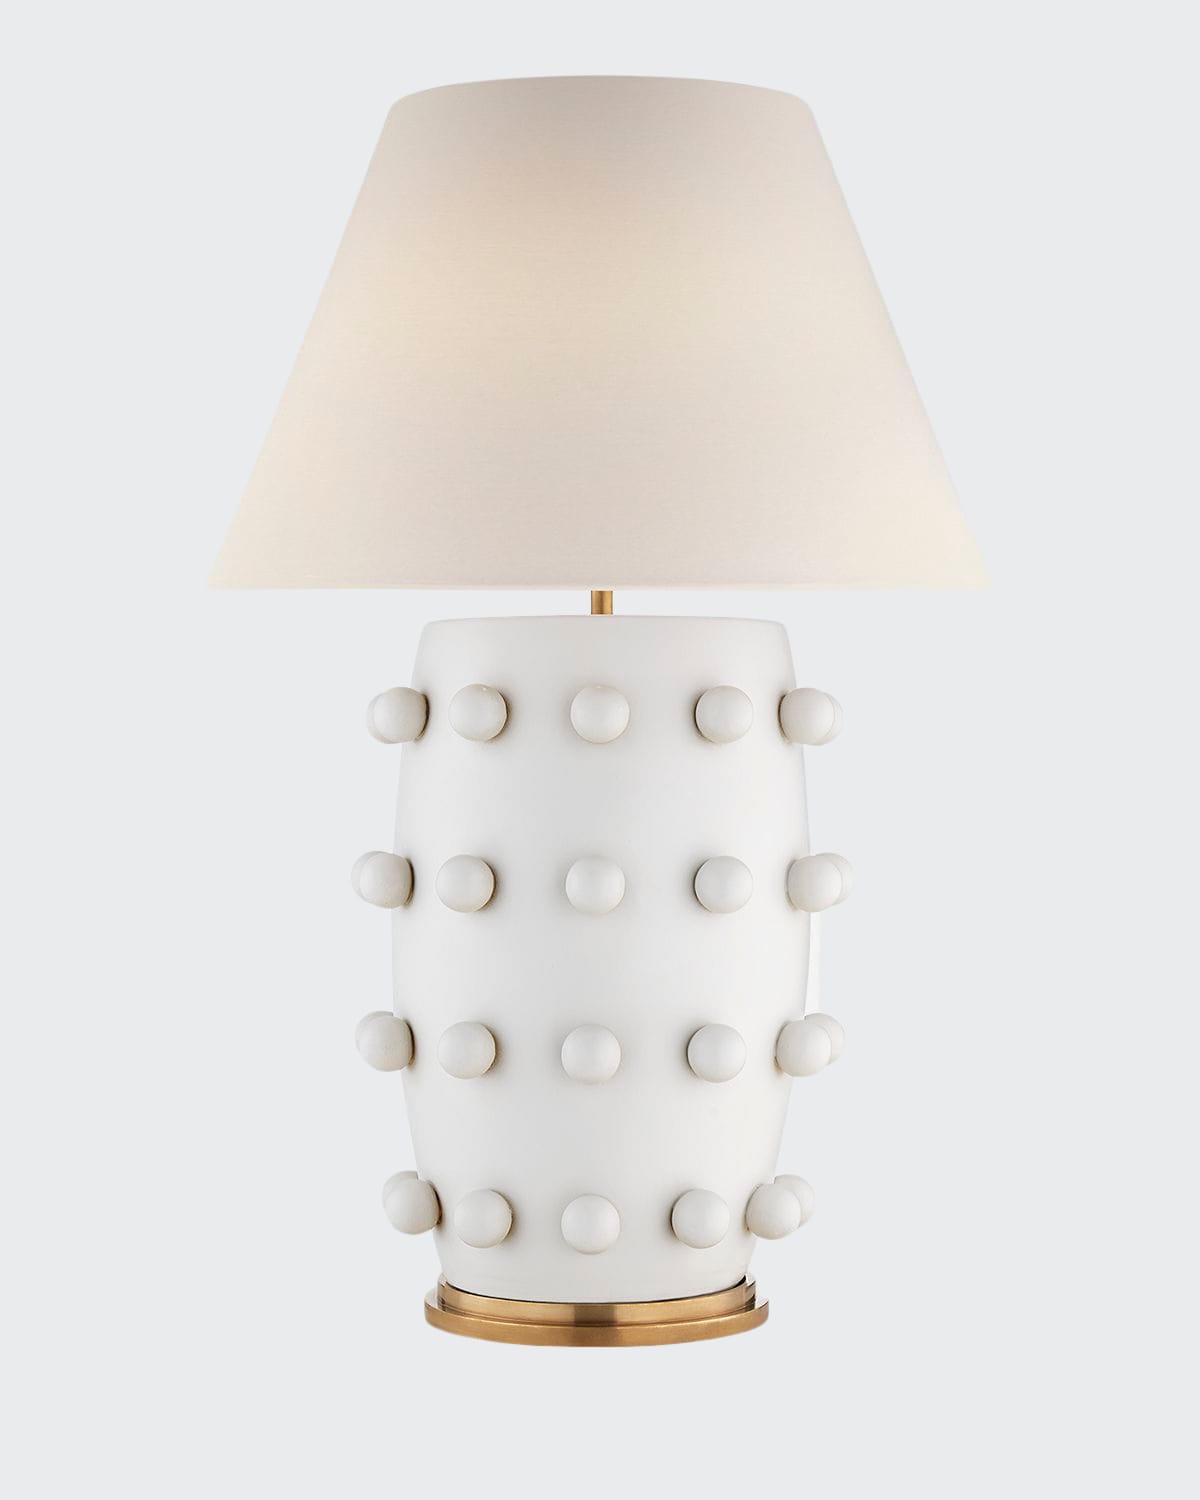 Kelly Wearstler For Visual Comfort Signature Linden Table Lamp In Ivory